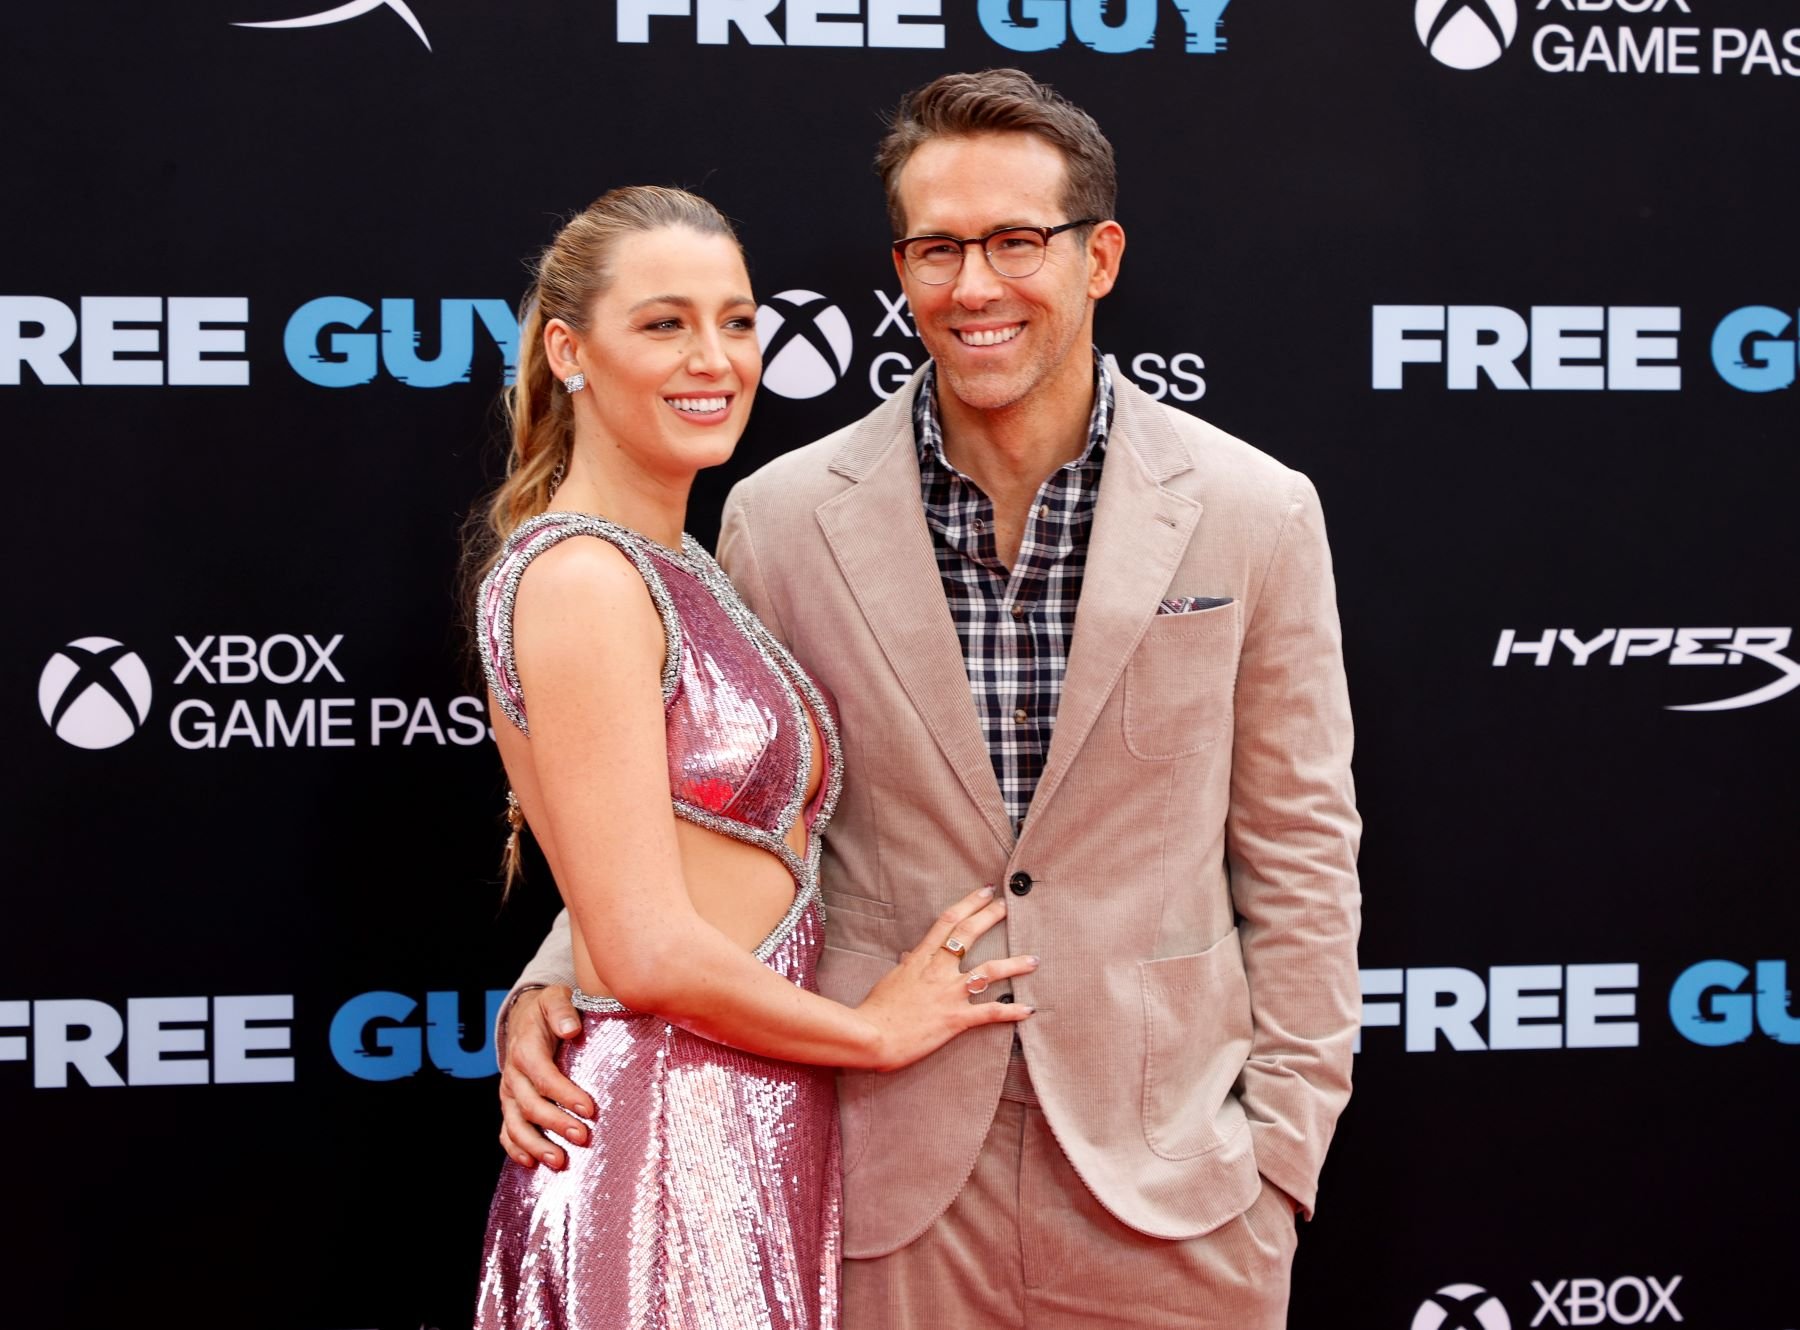 Blake Lively and Ryan Reynolds attending the "Free Guy" premiere at the AMC Lincoln Square Theater in New York City